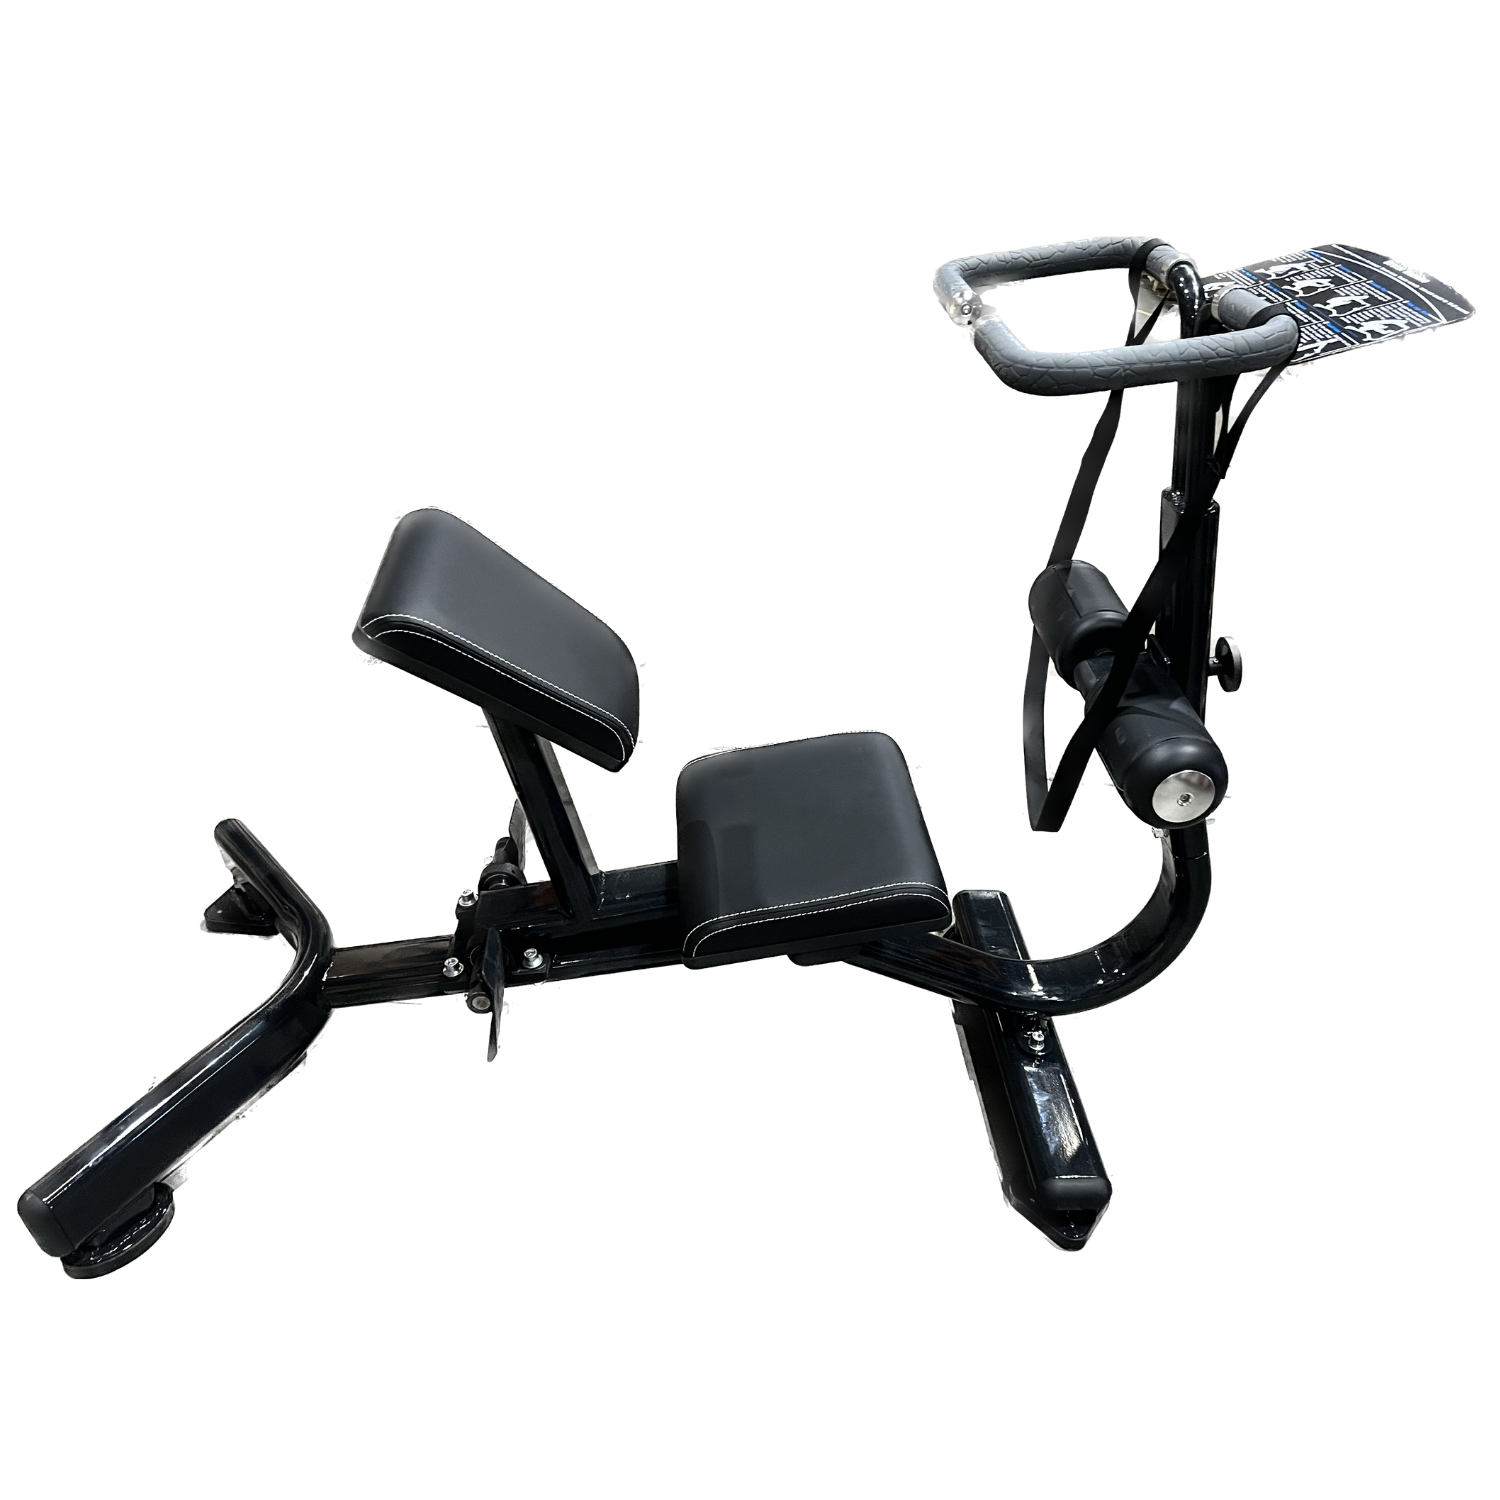 Realleader USA Commercial Stretch Machine-Gym Direct